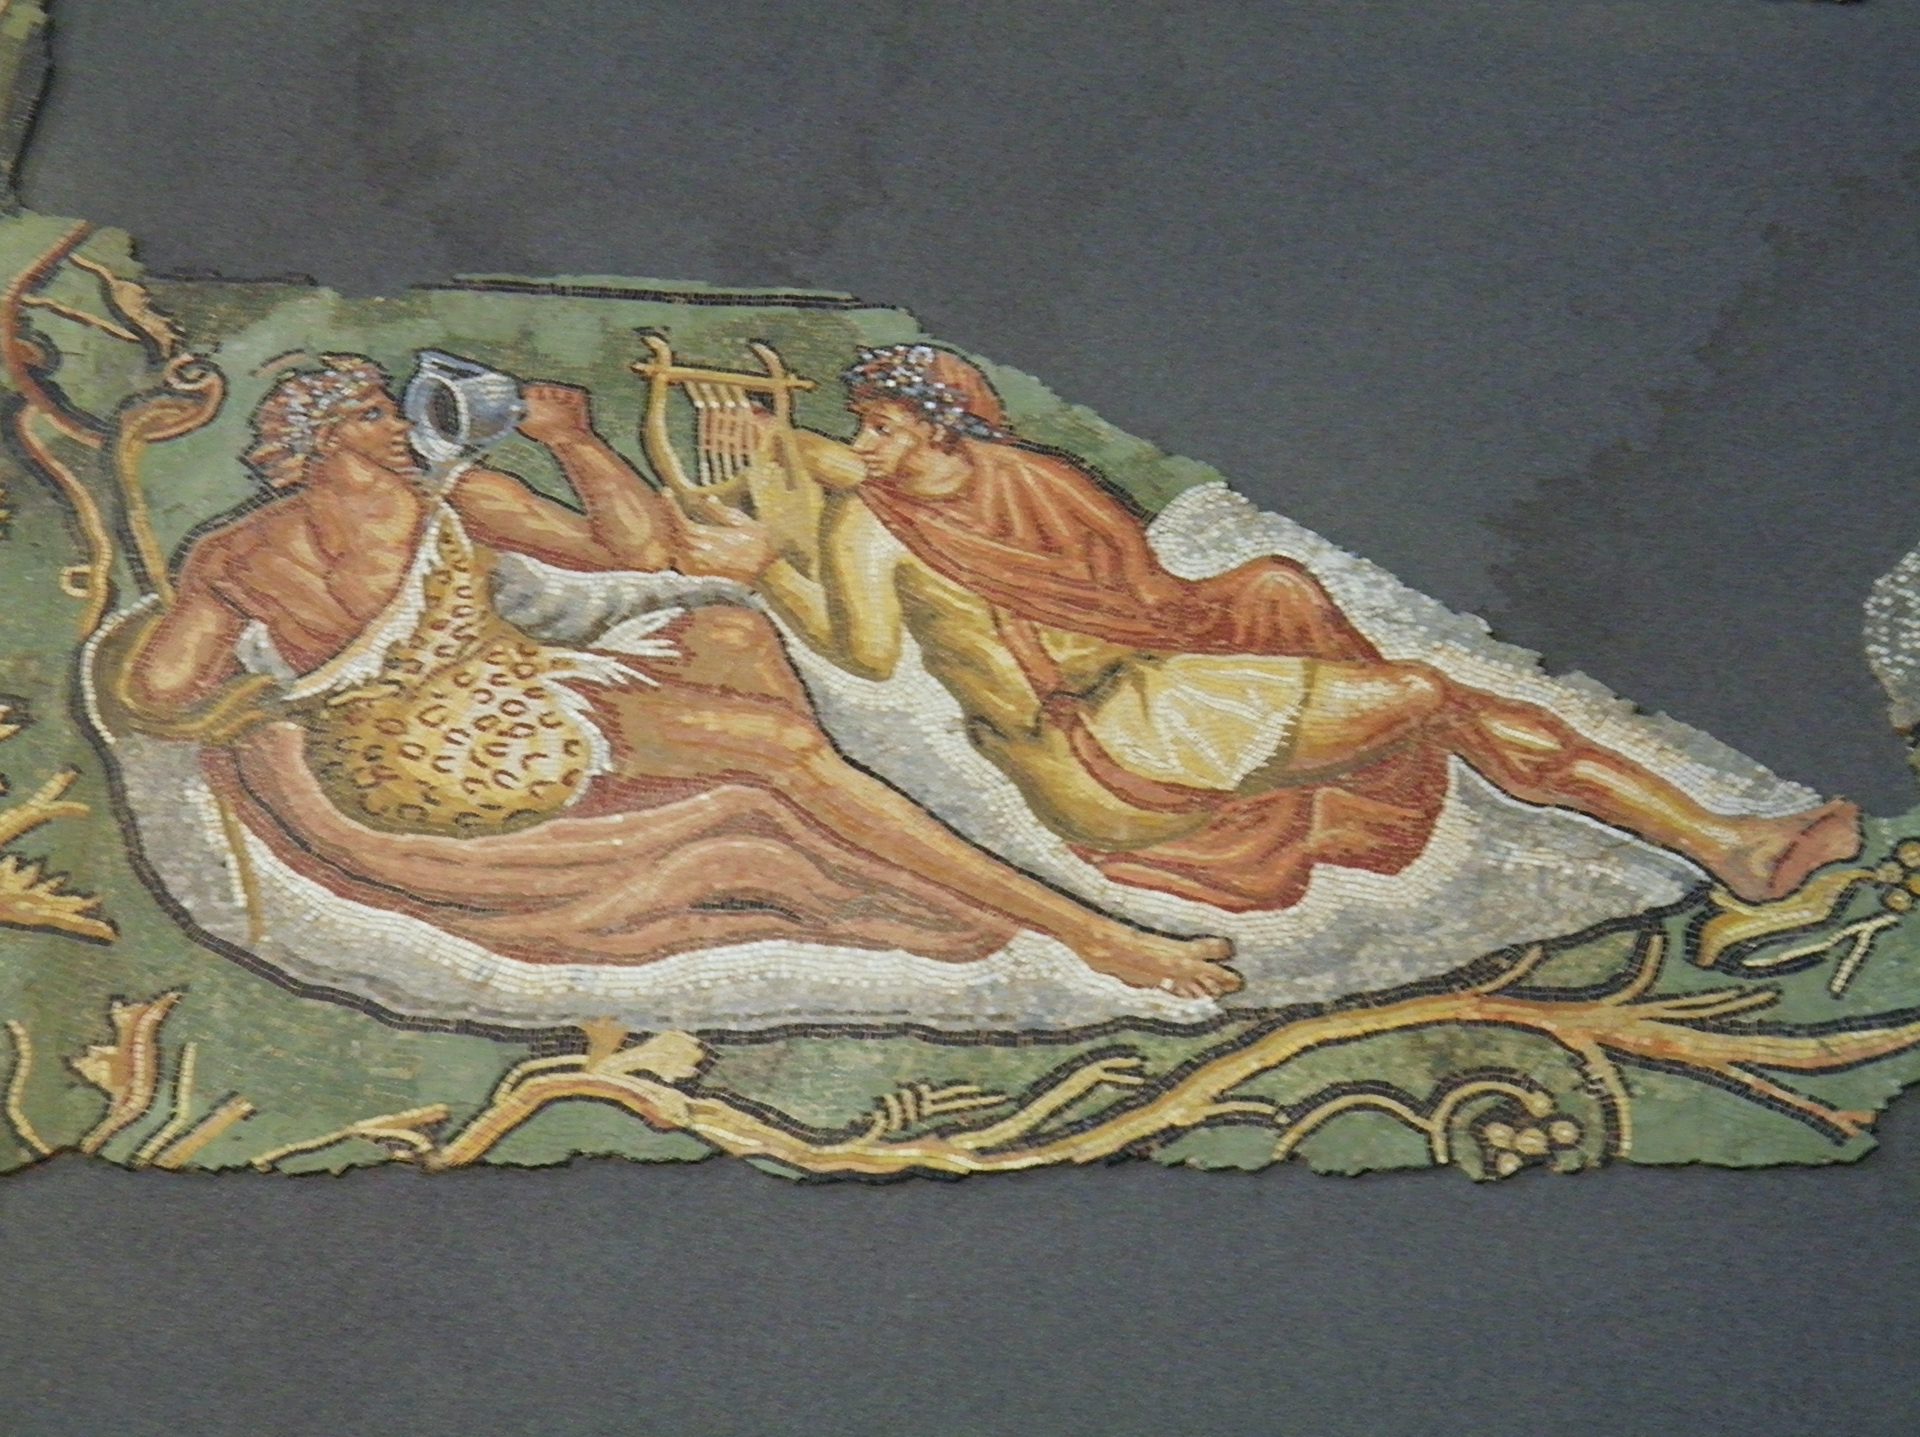 Mosaic detail of Bacchus reclining with lyre player